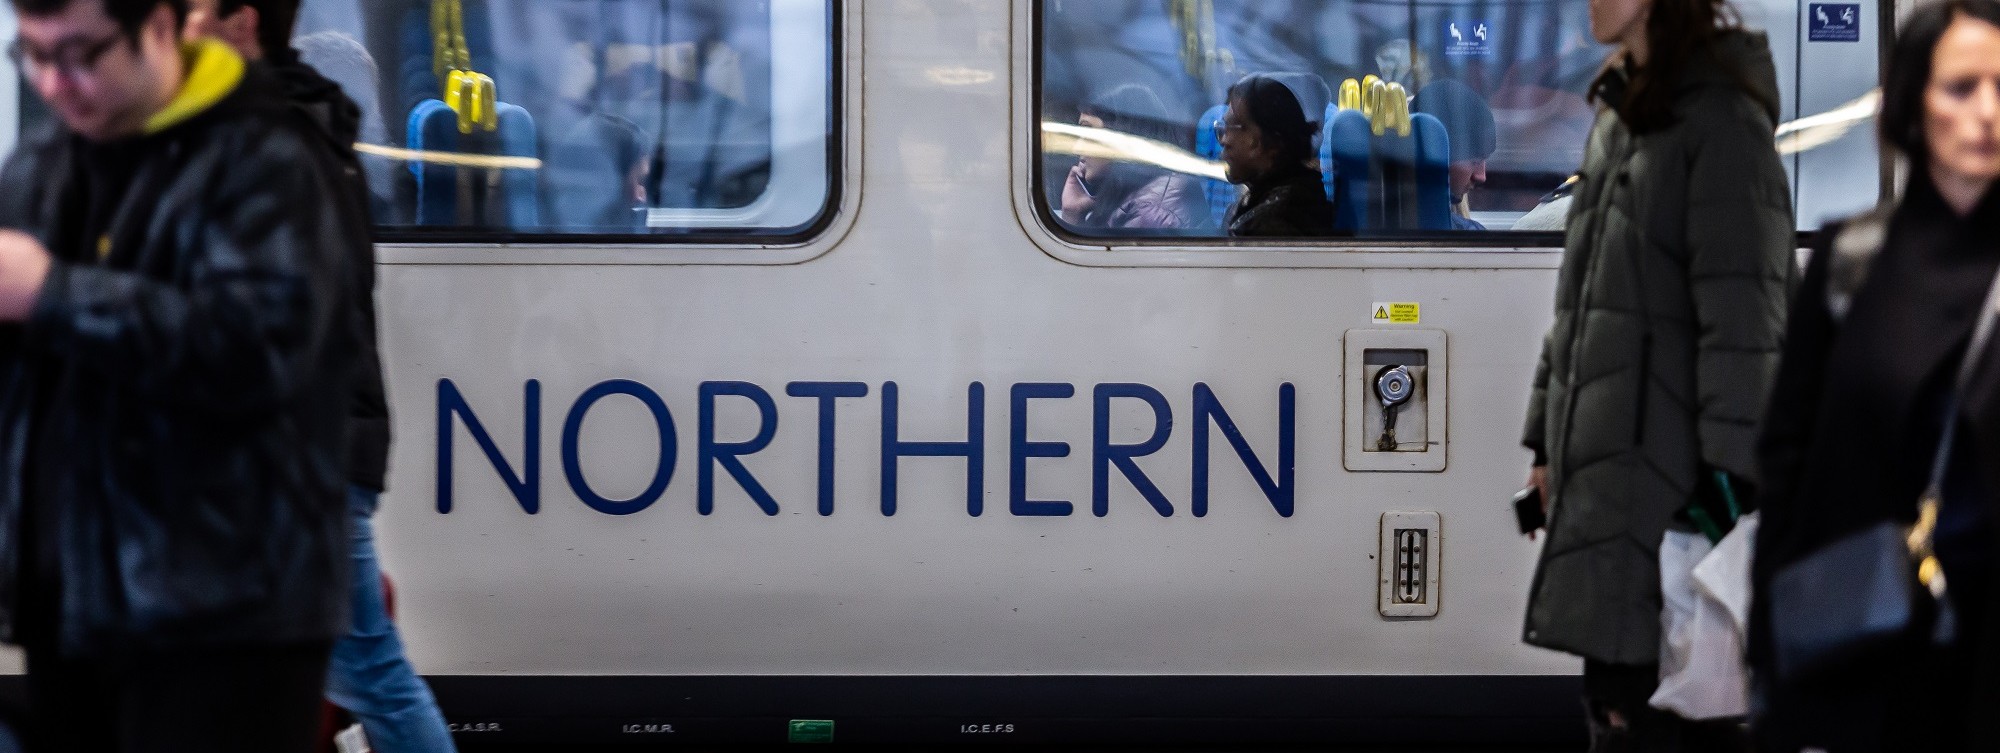 image-shows-northern-service-with-customers-on-aboard